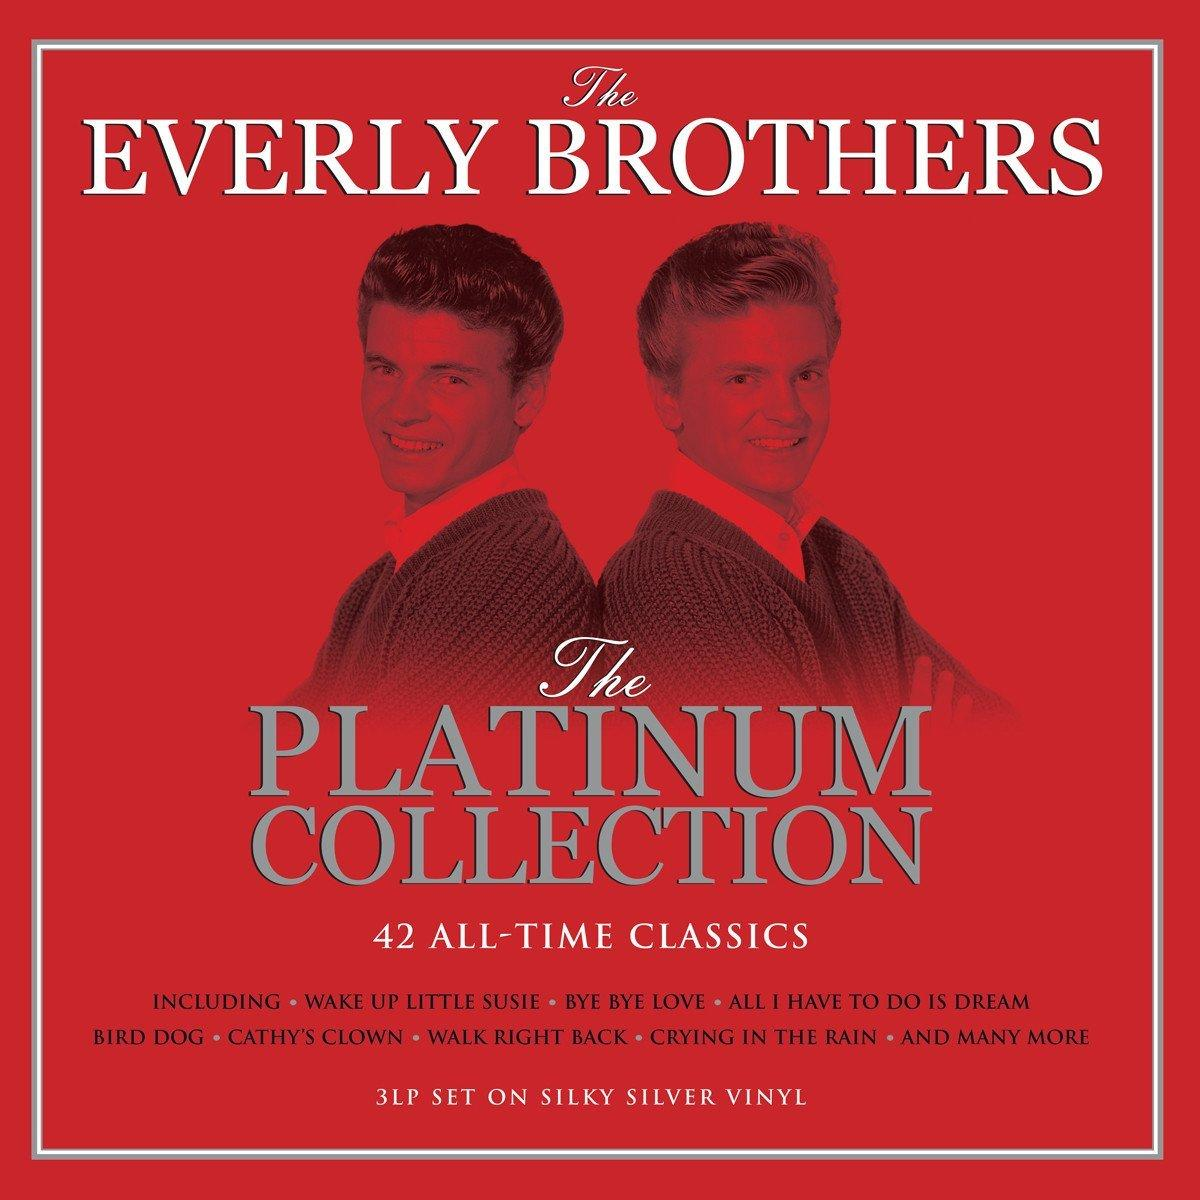 The Everly Vinyl) Platinum (rotes Collection - - (Vinyl) Brothers